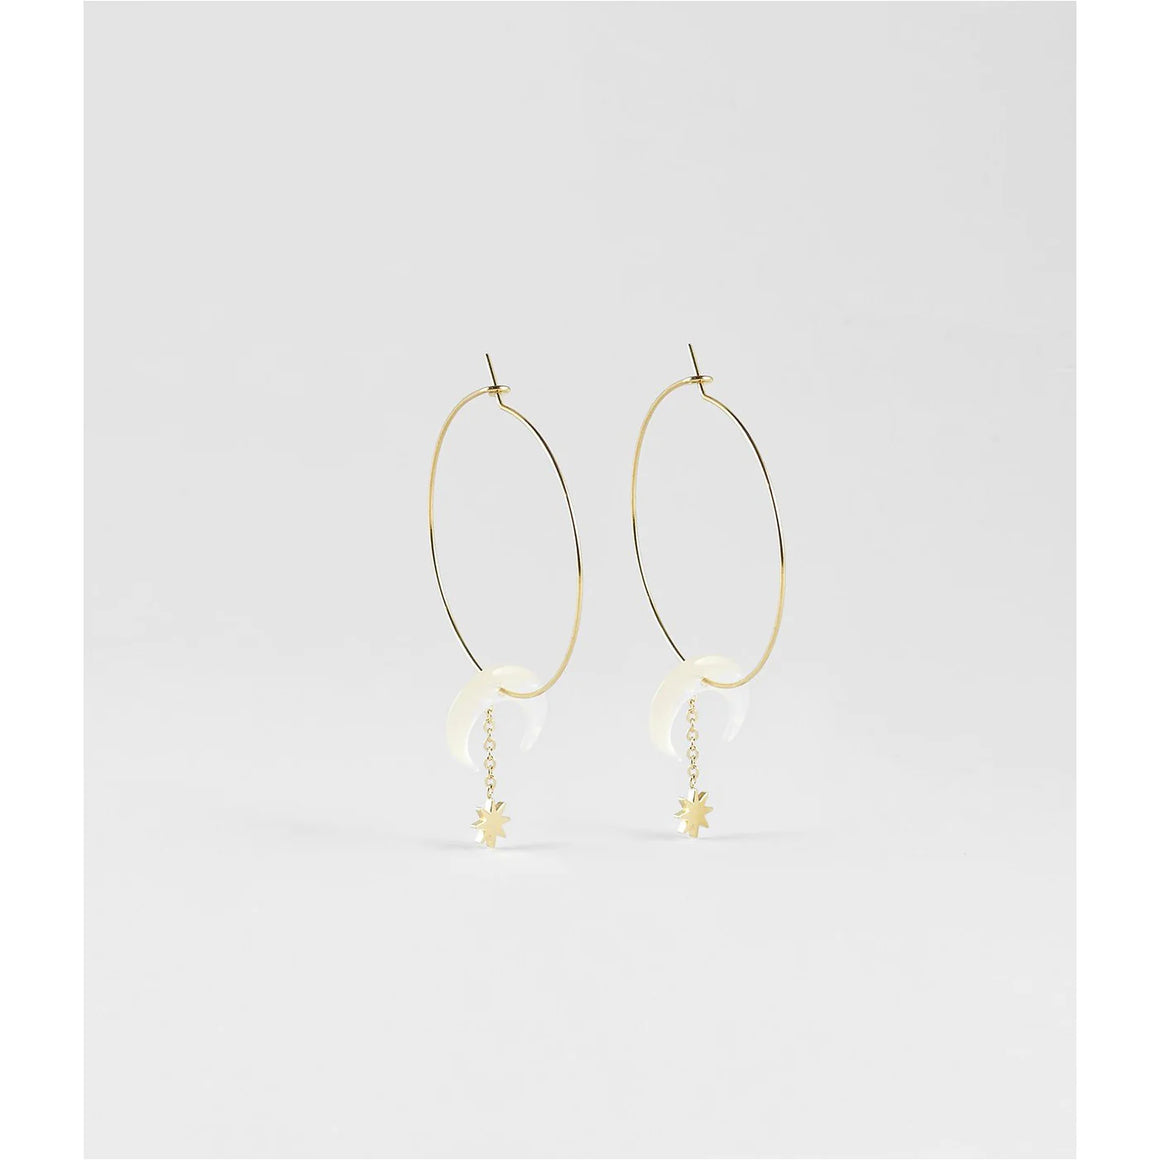 Asteria Earrings - Mother of Pearl & Gold